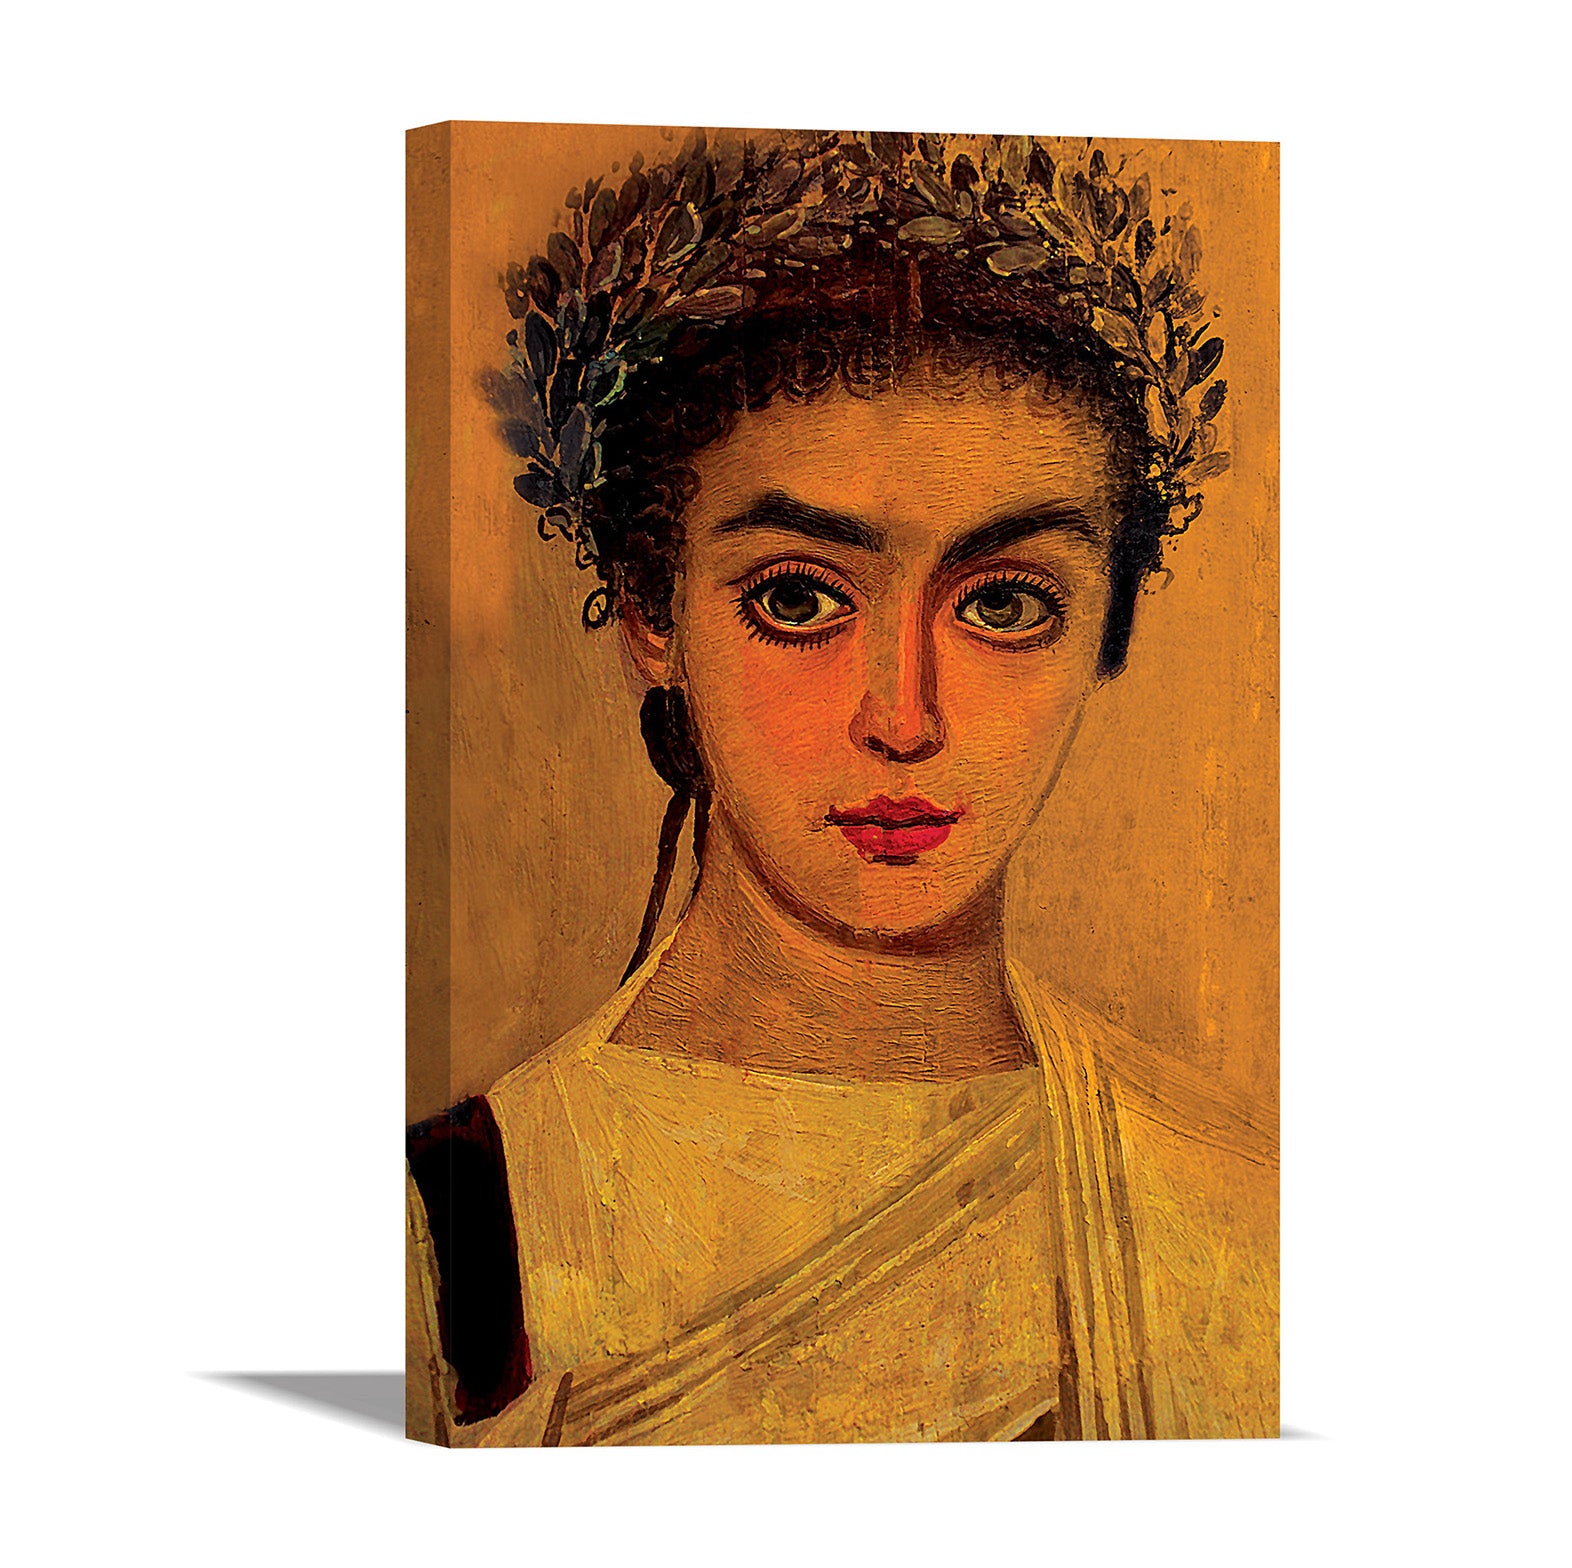 Portraits from Ancient Egypt